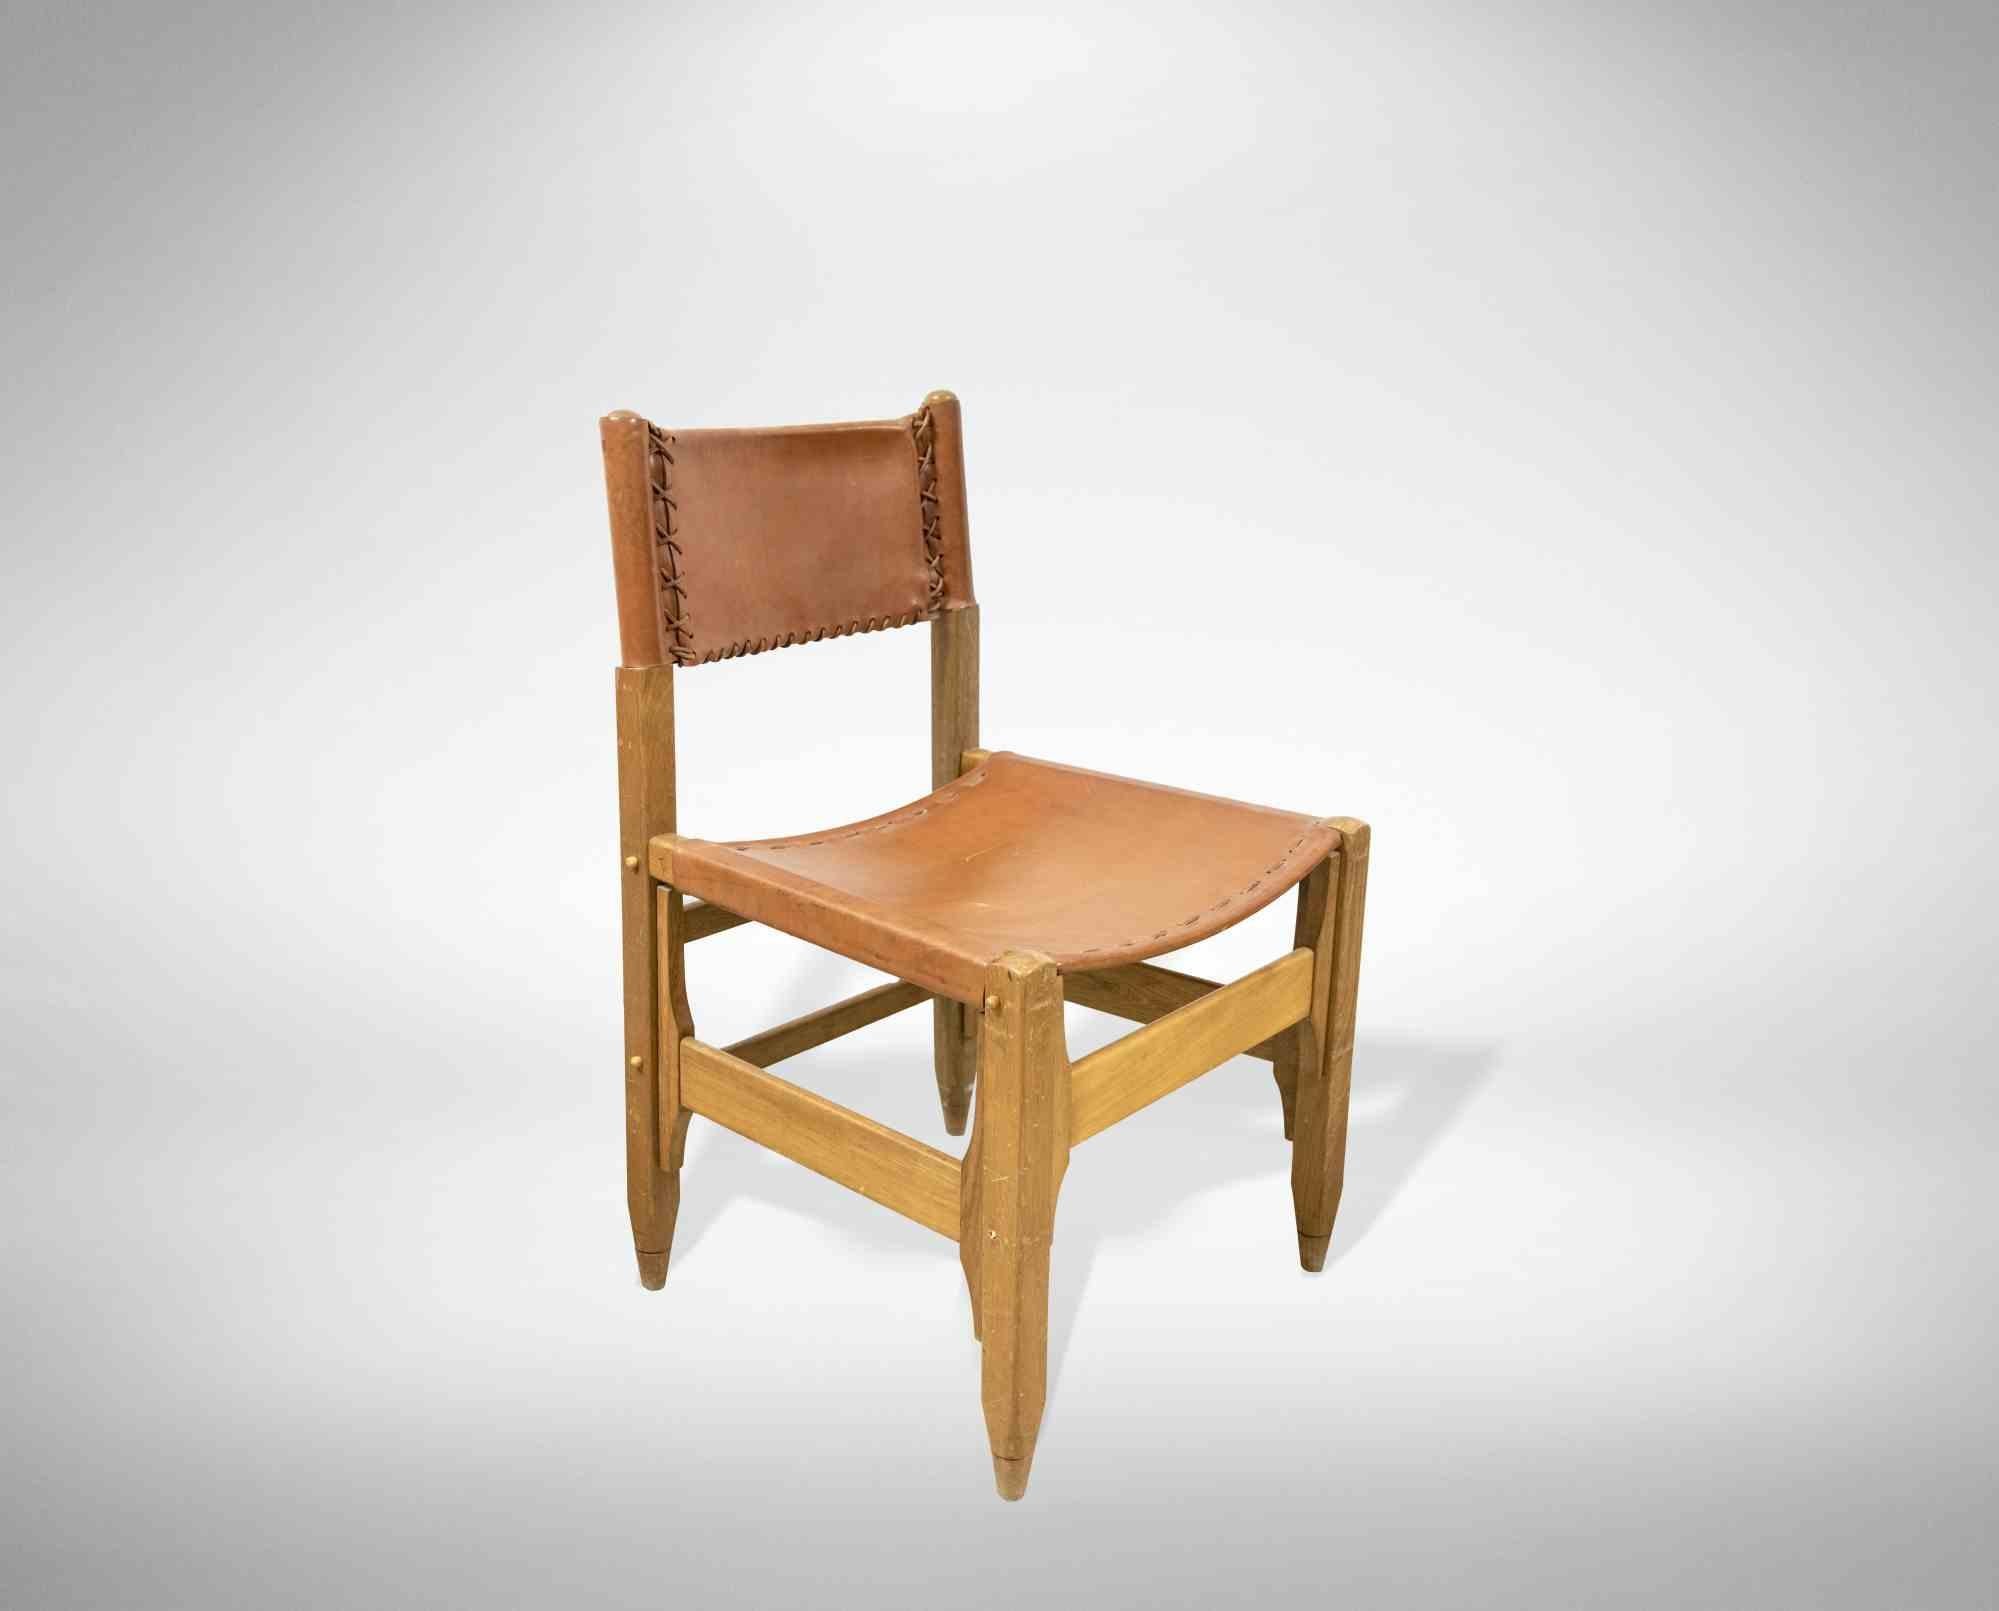 Set of four vintage chairs is an original design furniture item realized by Werner Biermann for Arte Sano, Colombia, in 1960s.

Teak and walnut, leather.

Iconic and rare set of four chairs, in excellent condition.